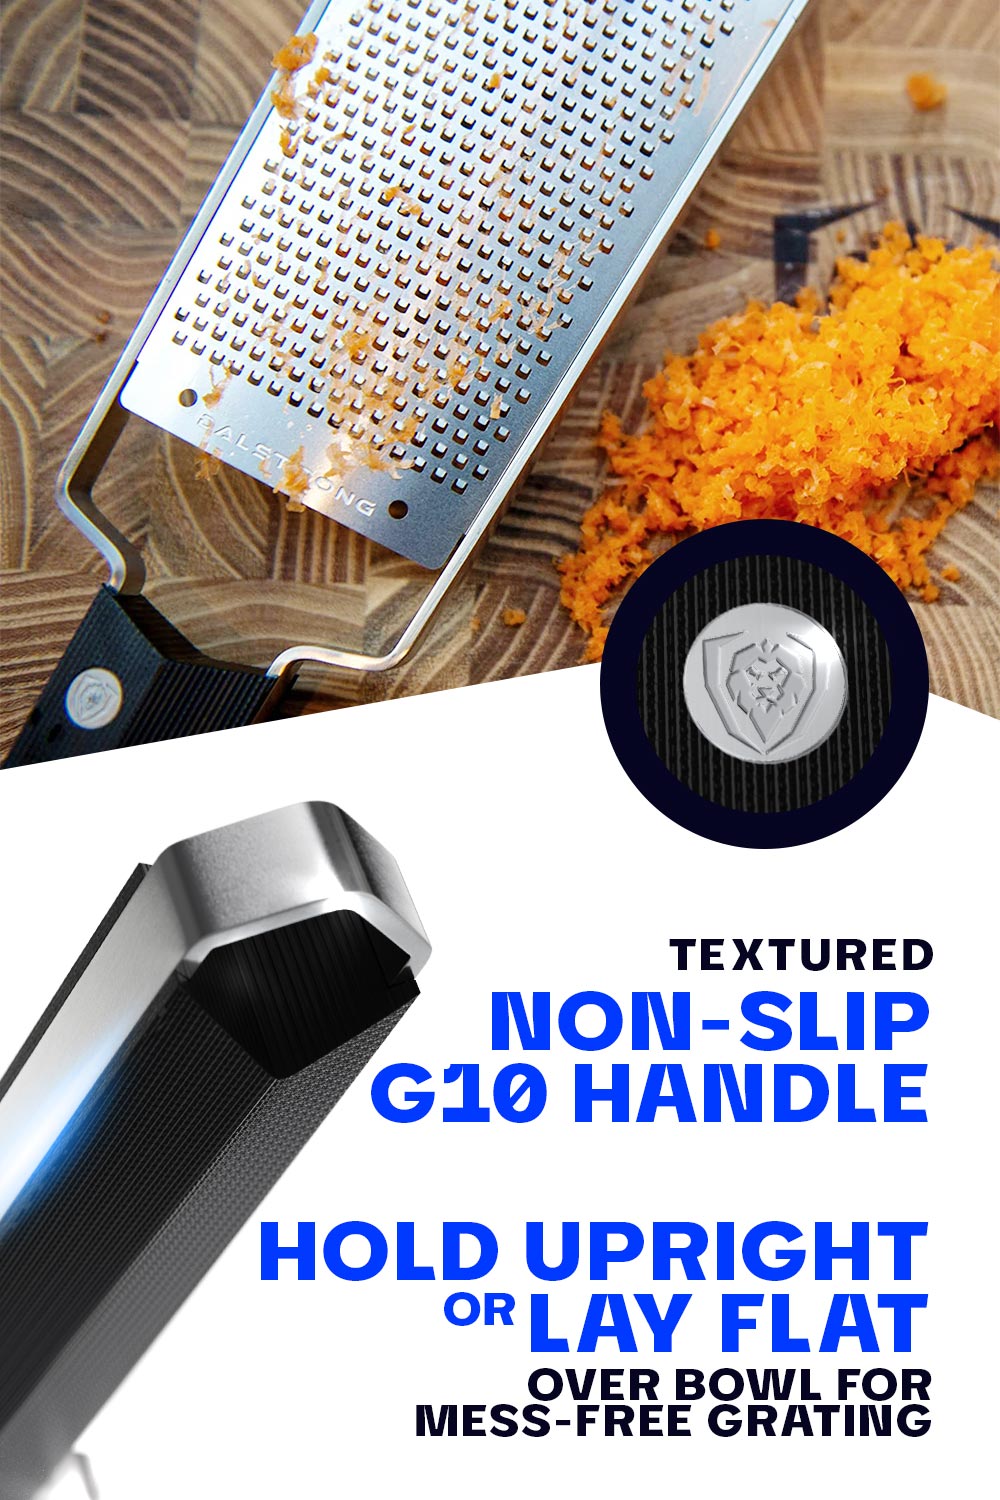 Professional series all stainless fine grater